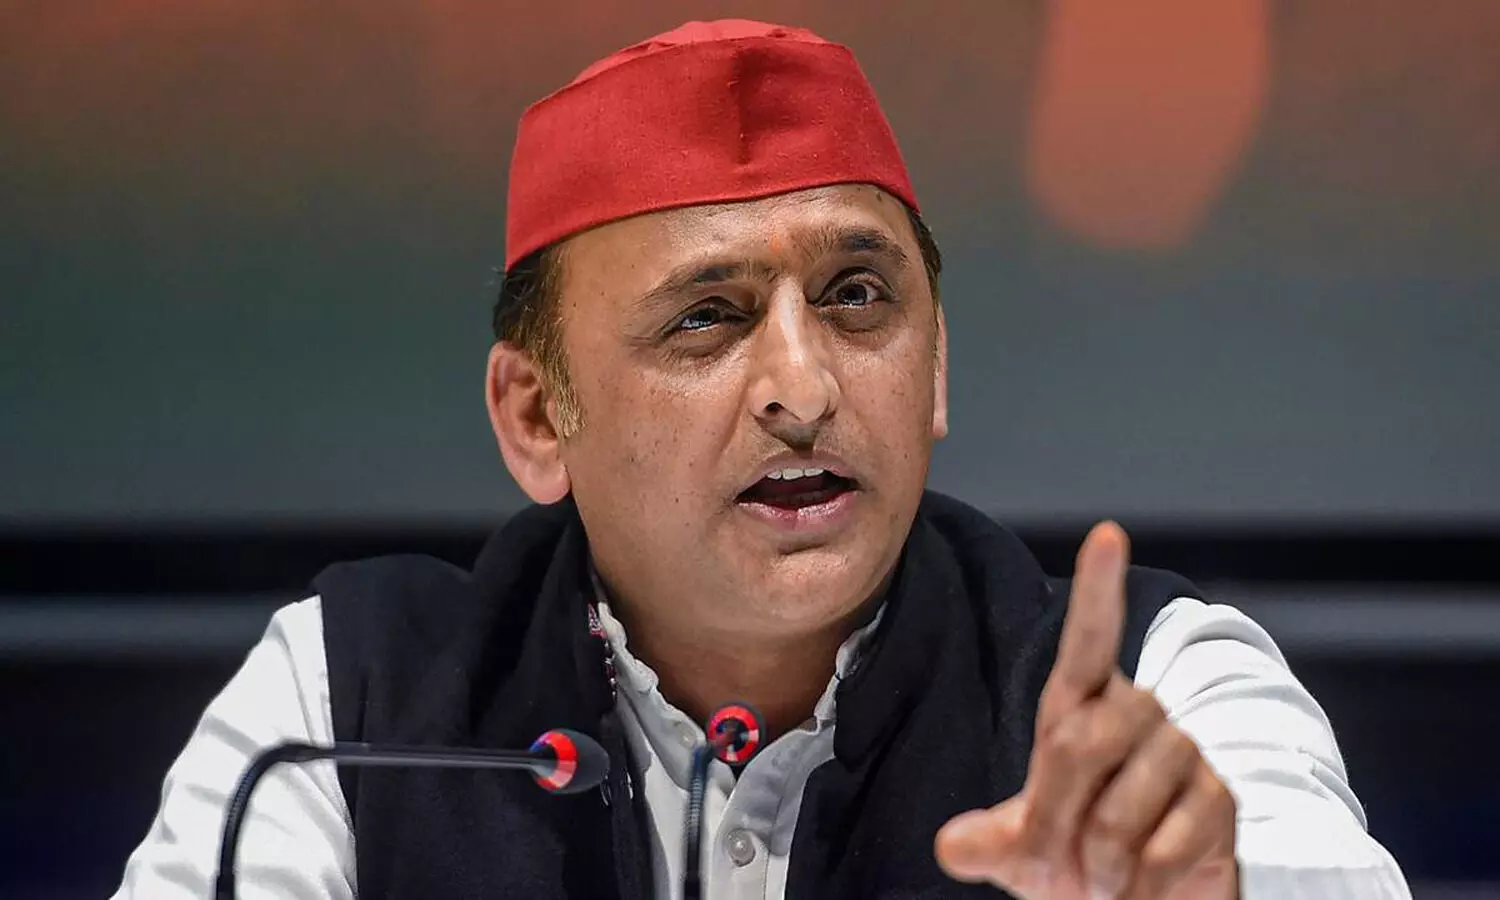 Akhilesh Yadav: British fired from front at Jallianwala Bagh, BJP guys mowed down farmers from behind